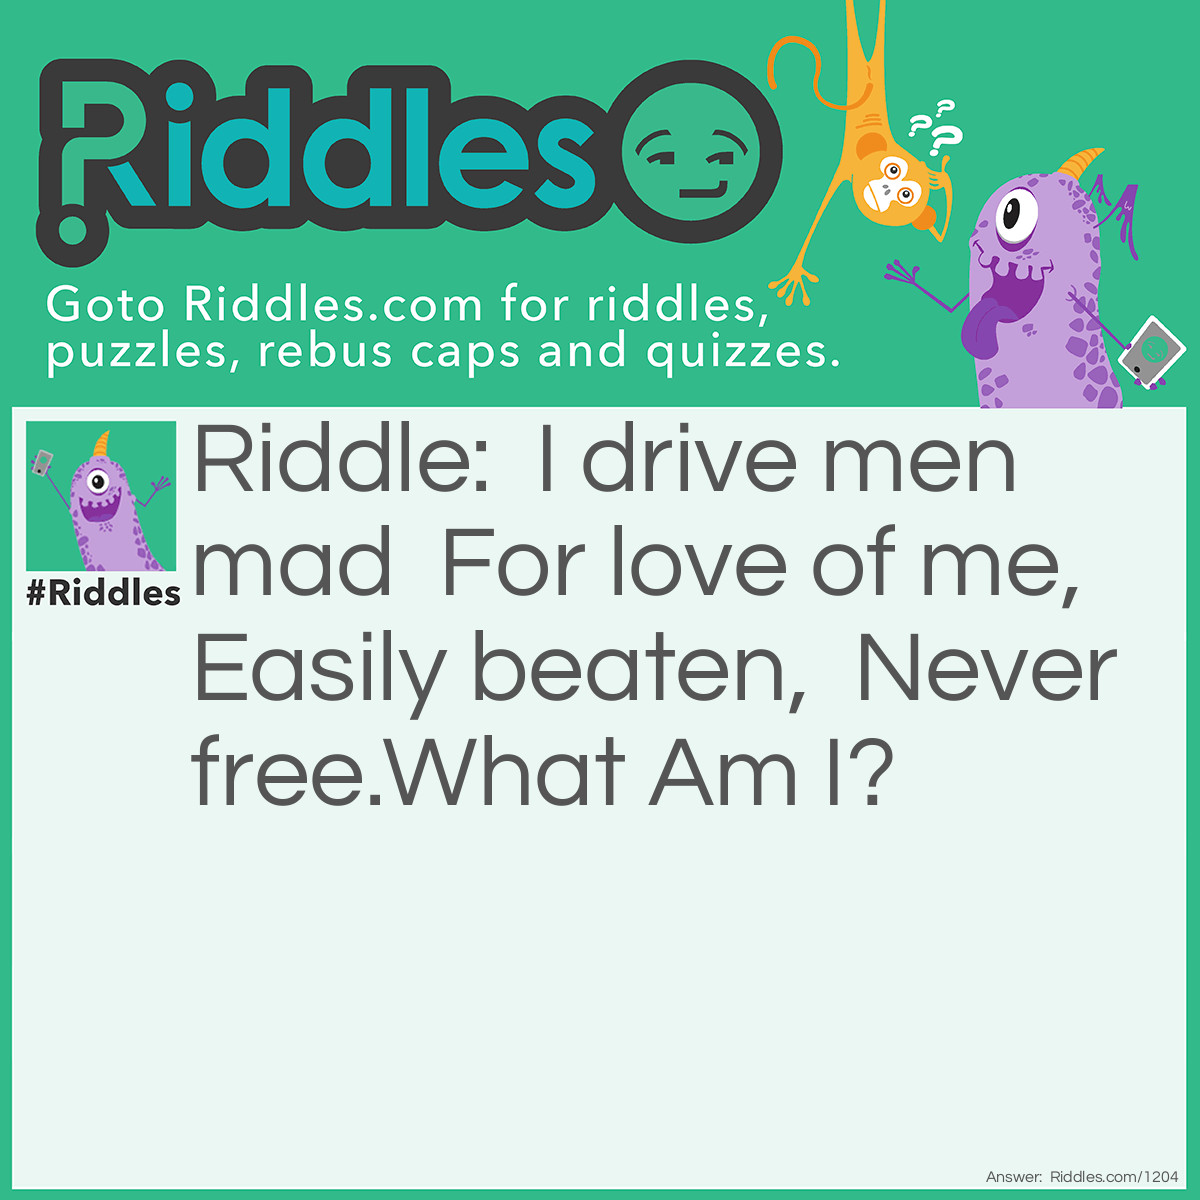 Riddle: I drive men mad  For love of me,  Easily beaten,  Never free.
What Am I? Answer: Gold.